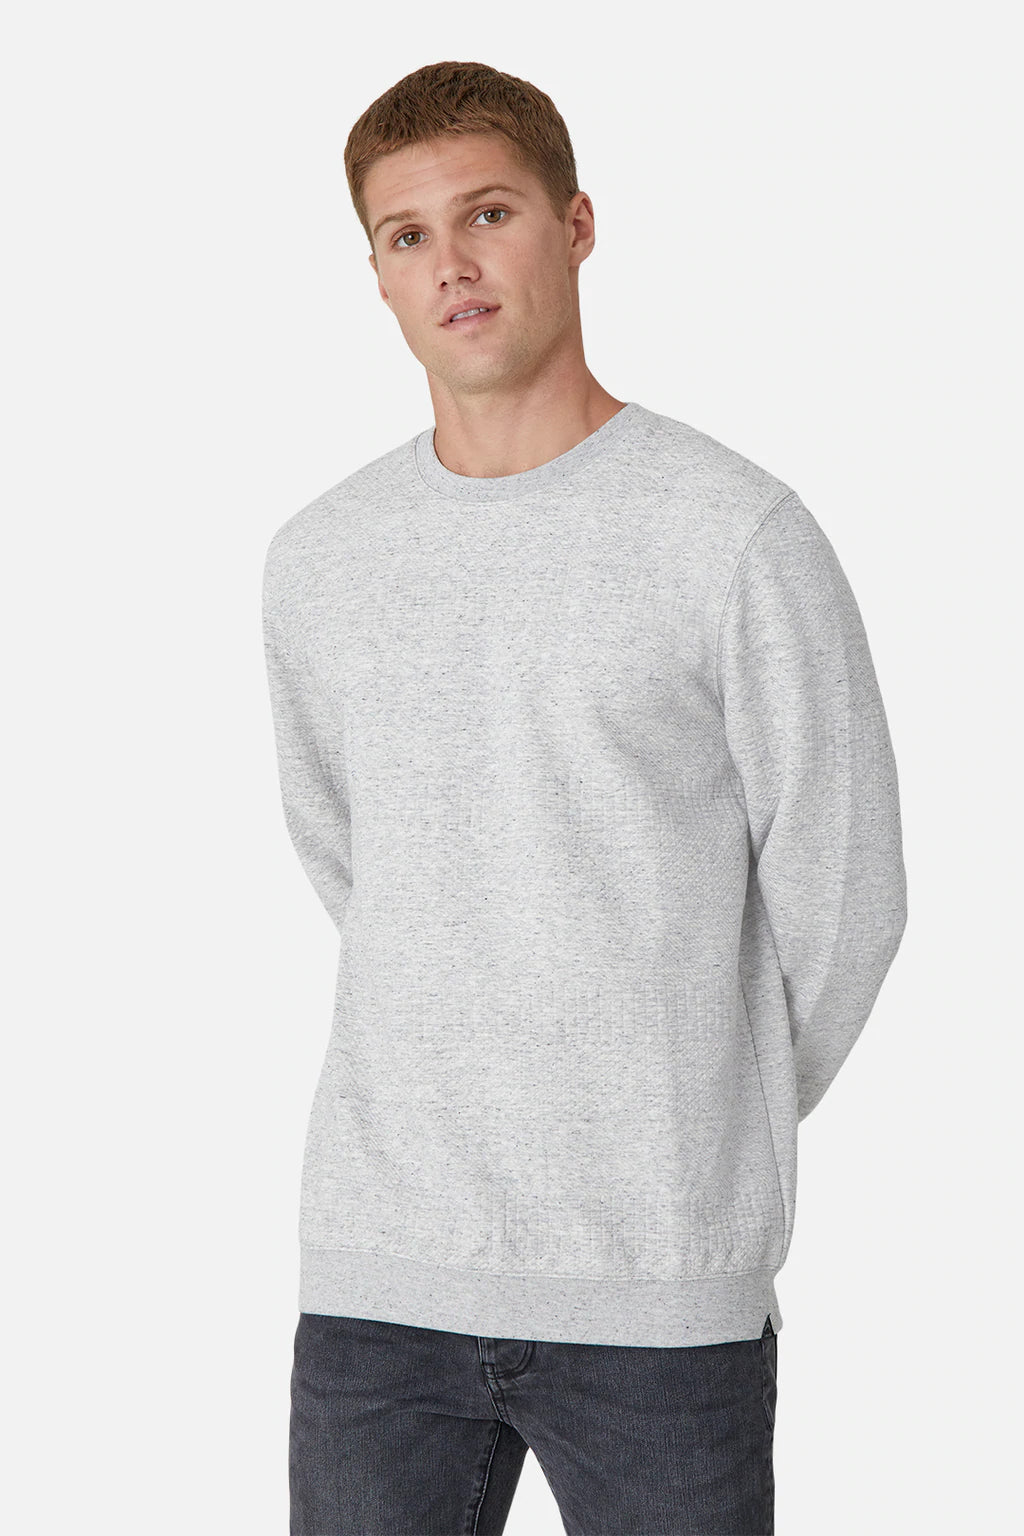 INDUSTRIE - THE IVERSON SWEAT - HEATHER